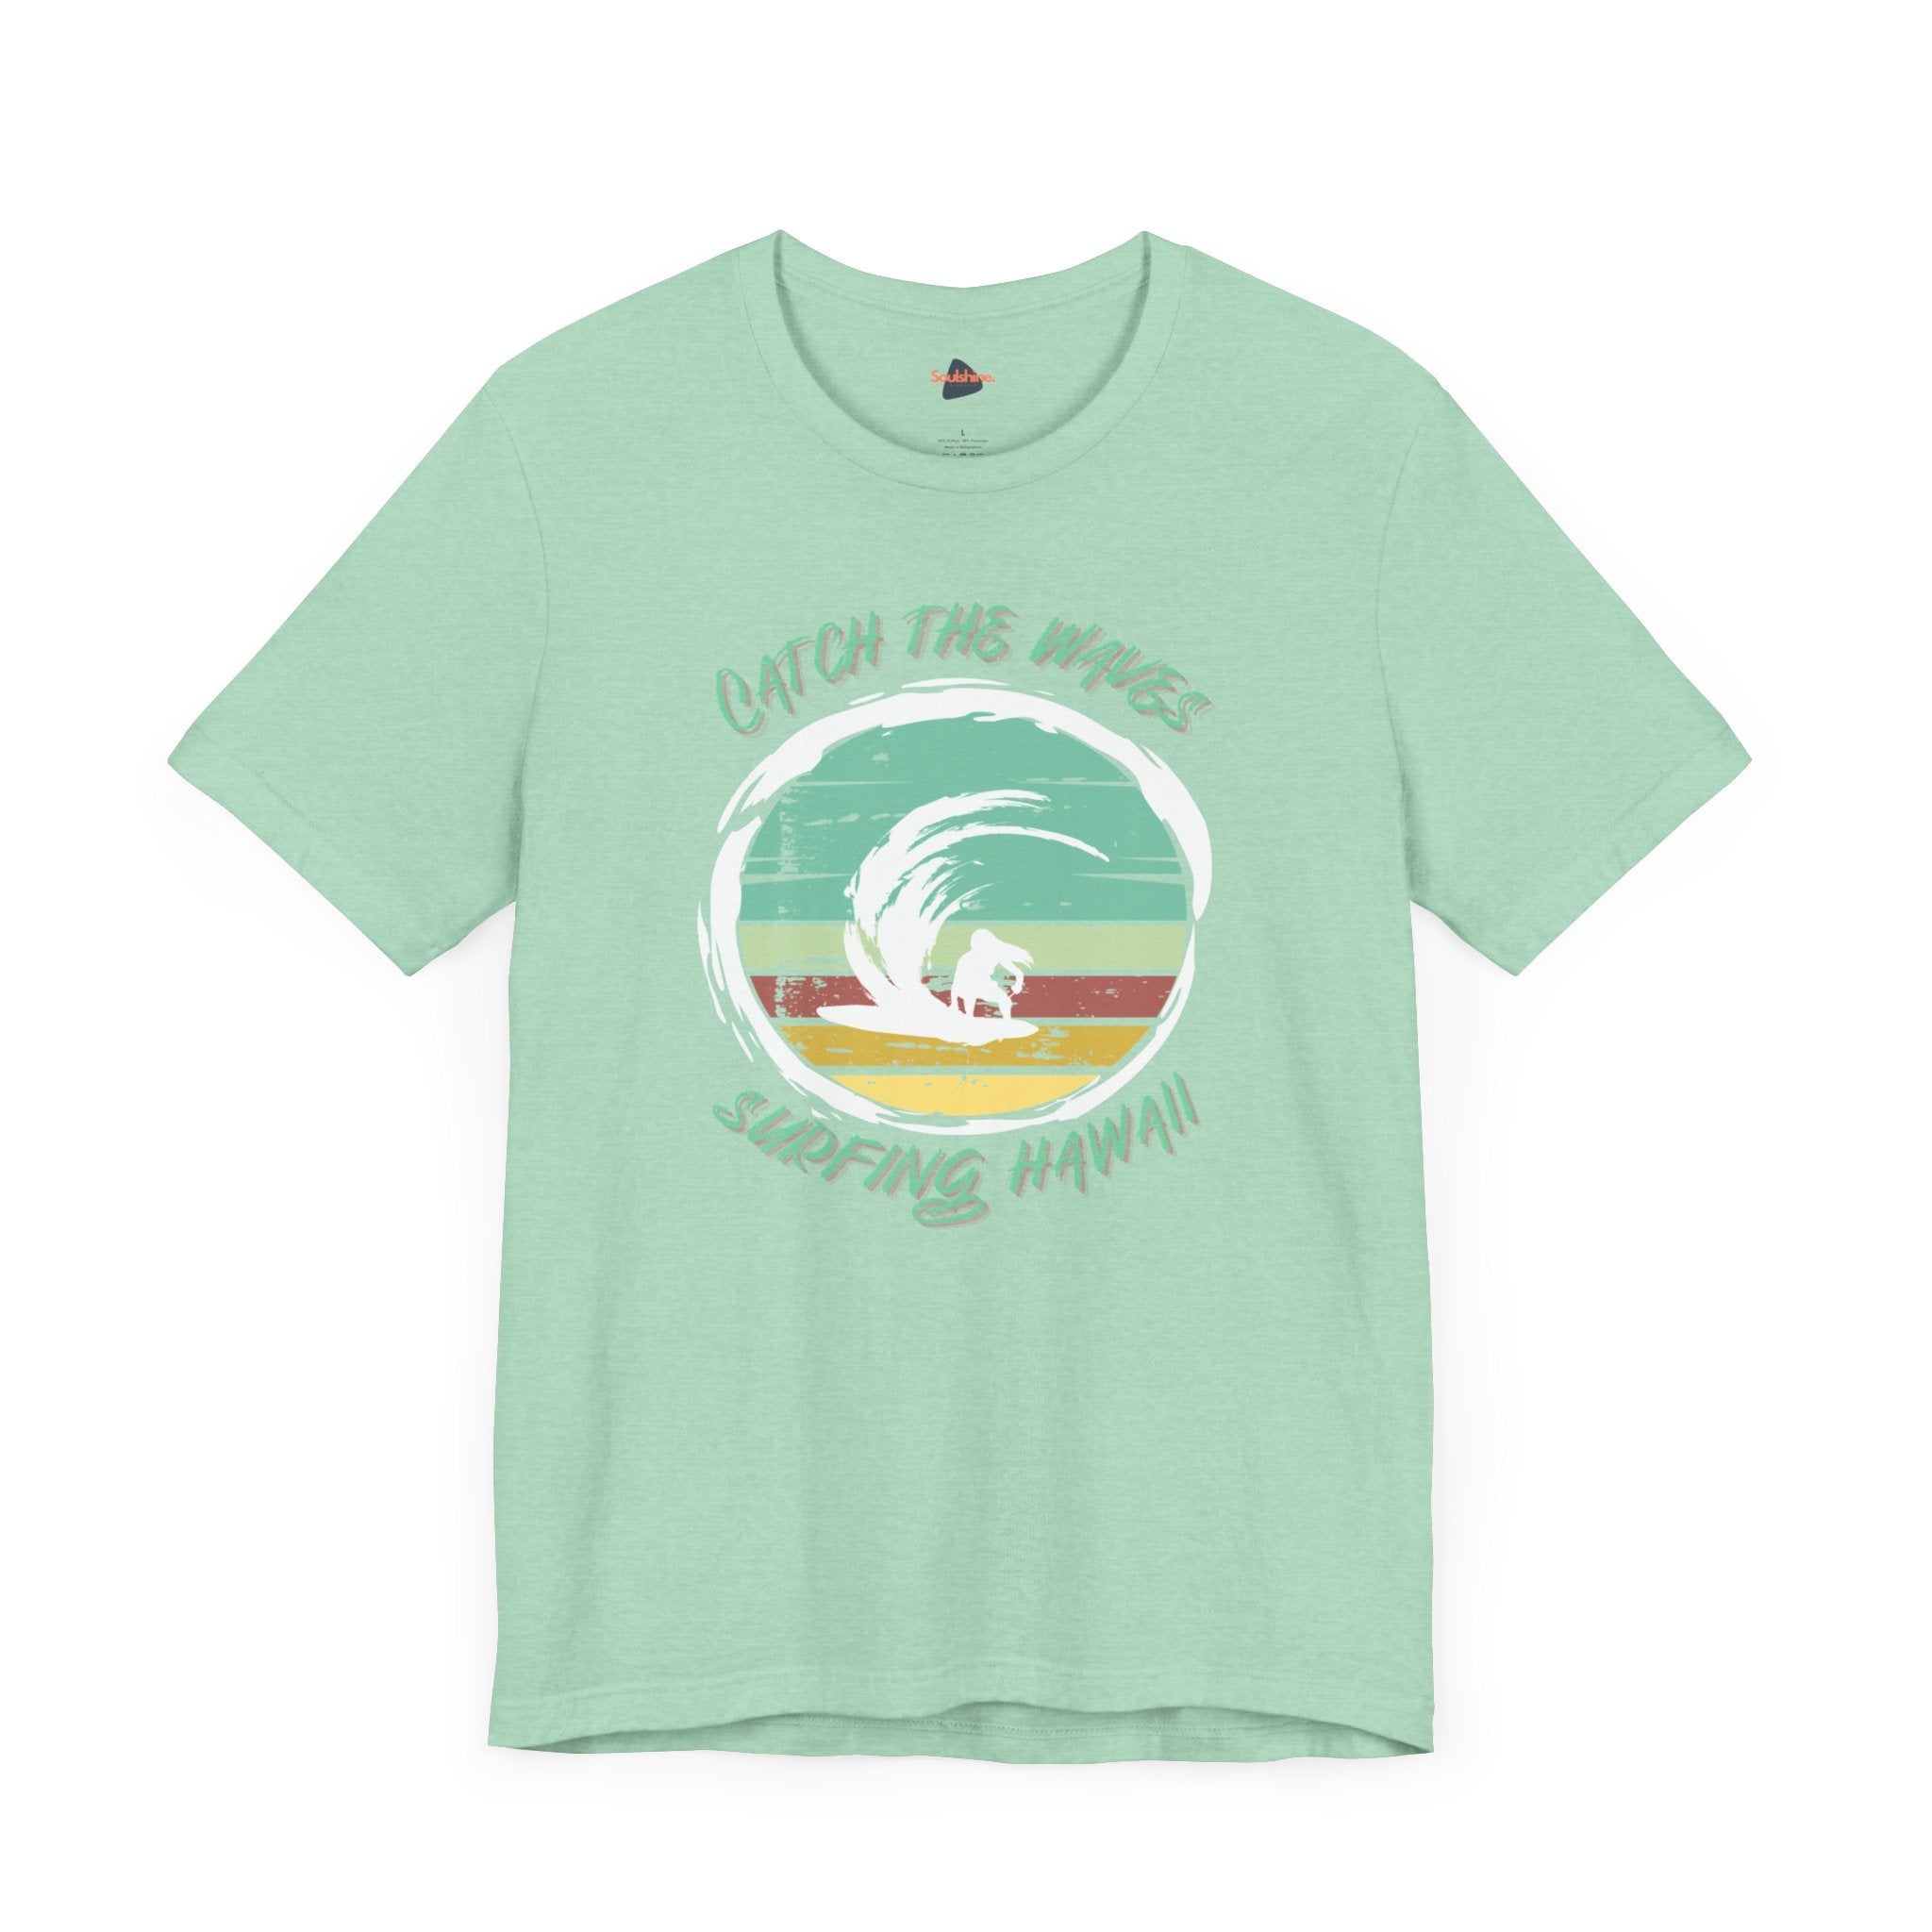 Catch the Waves - Surfing T-Shirt direct-to-garment green shirt with surfboard print